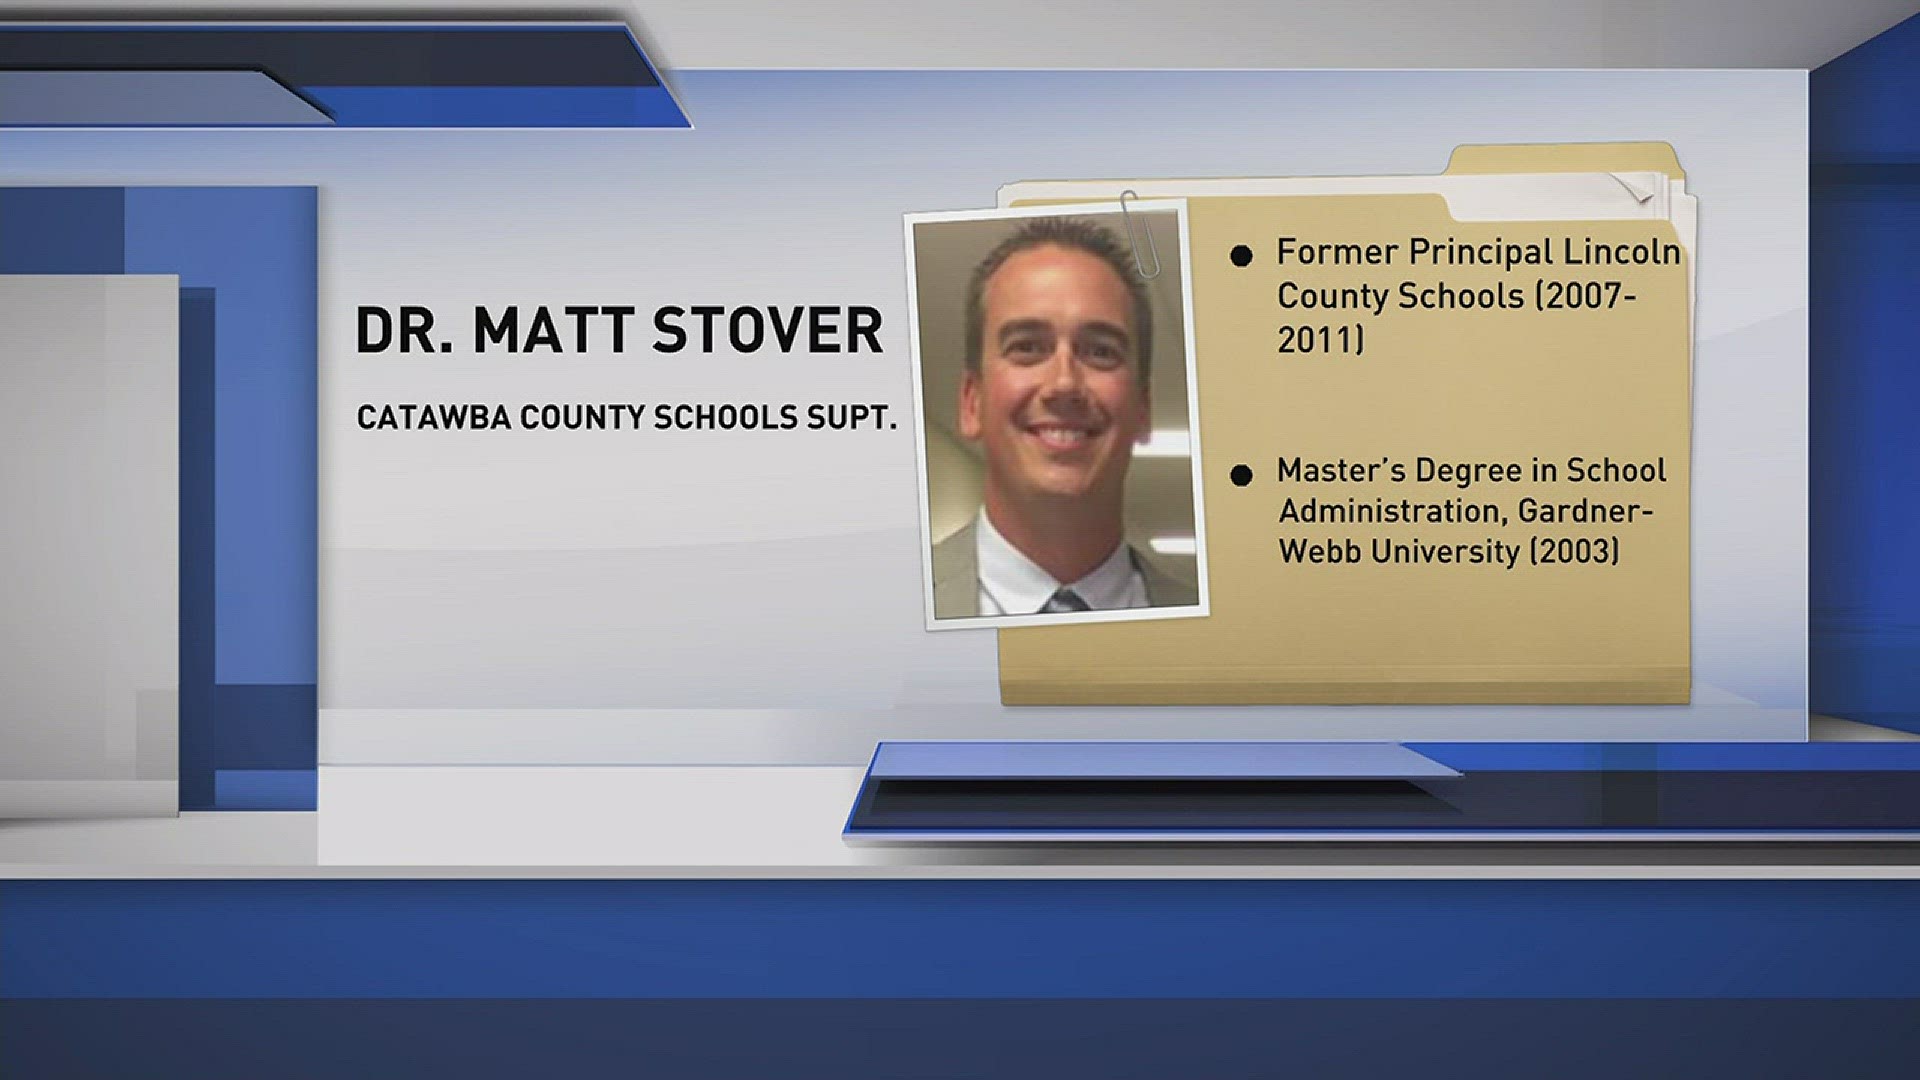 Catawba County Superintendent Dr. Matt Stover has over 15 years of experience in public education.